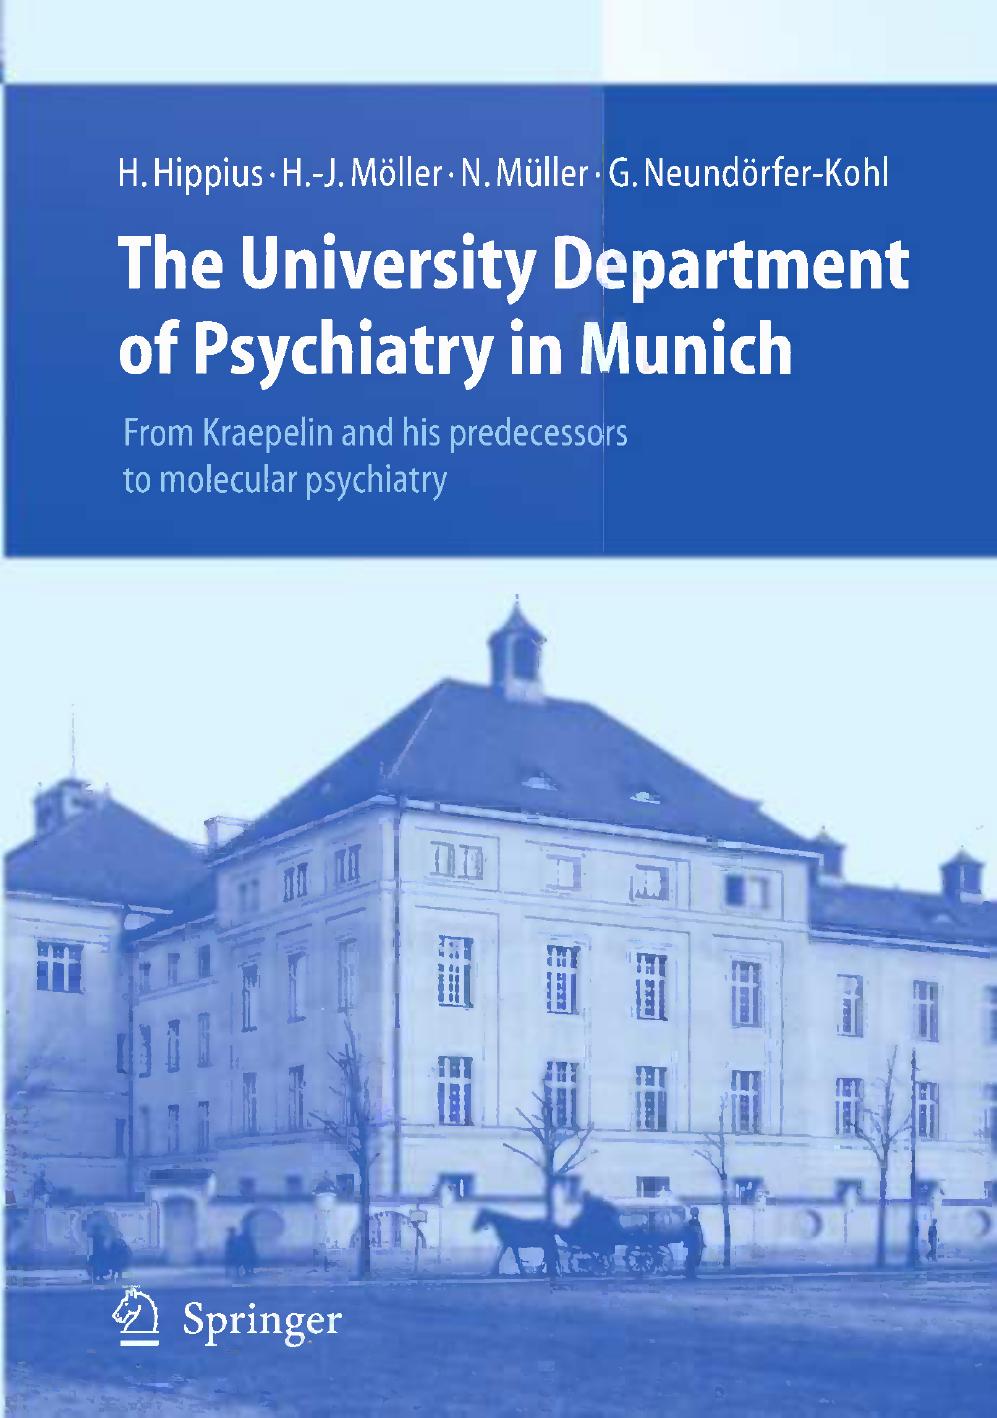 The University Department of Psychiatry in Munich  From Kraepelin and his predecessors to molecular psychiatry 2008